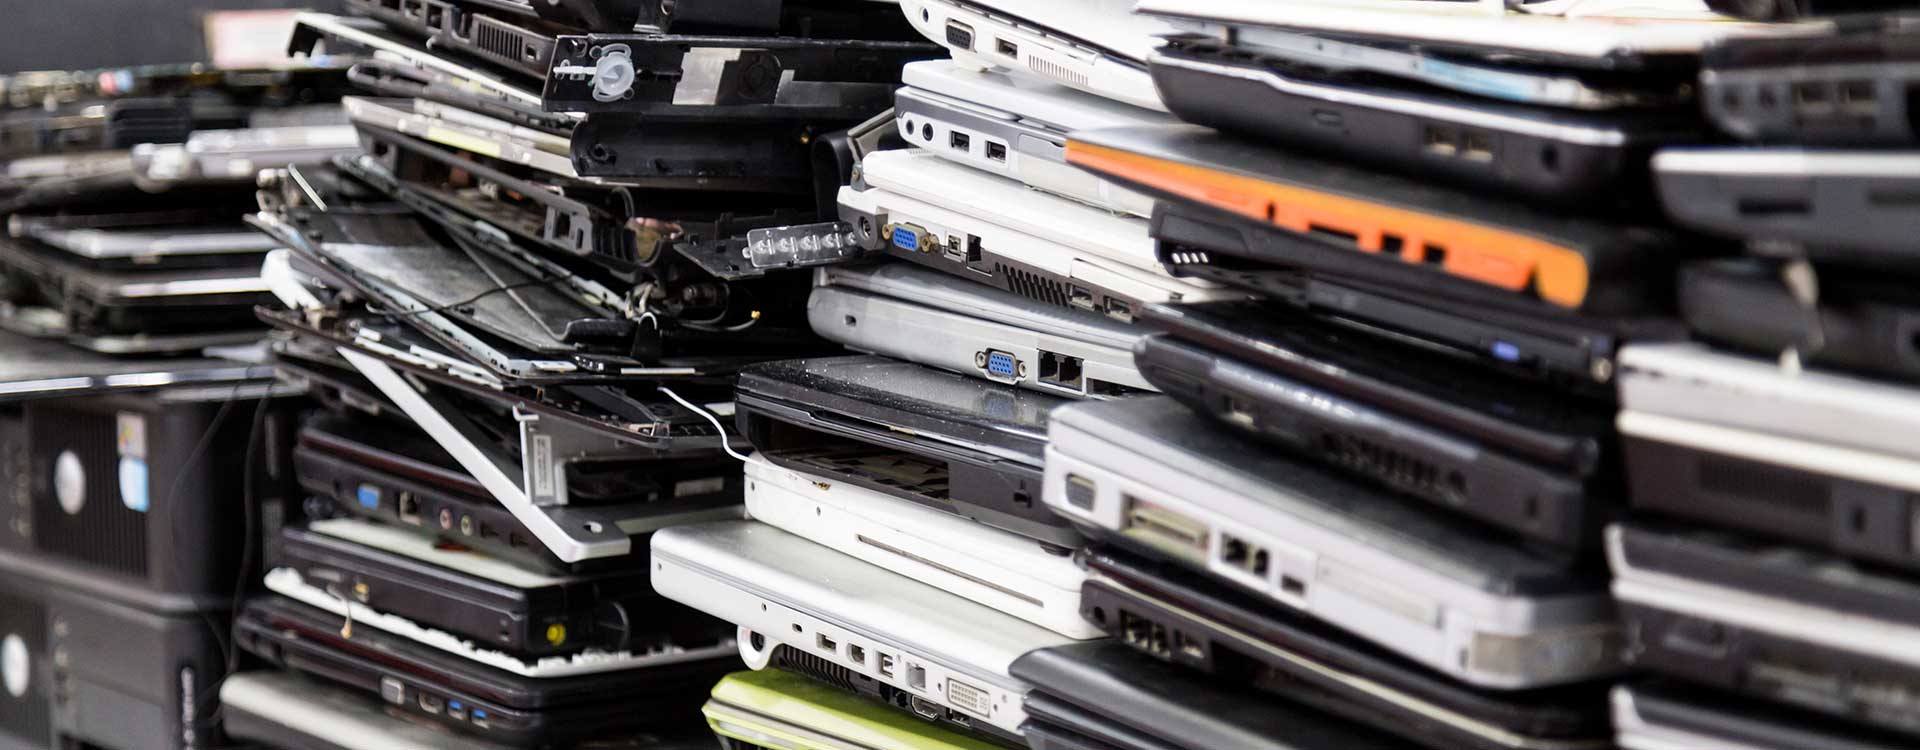 Benefits for Electronic Waste Recycling